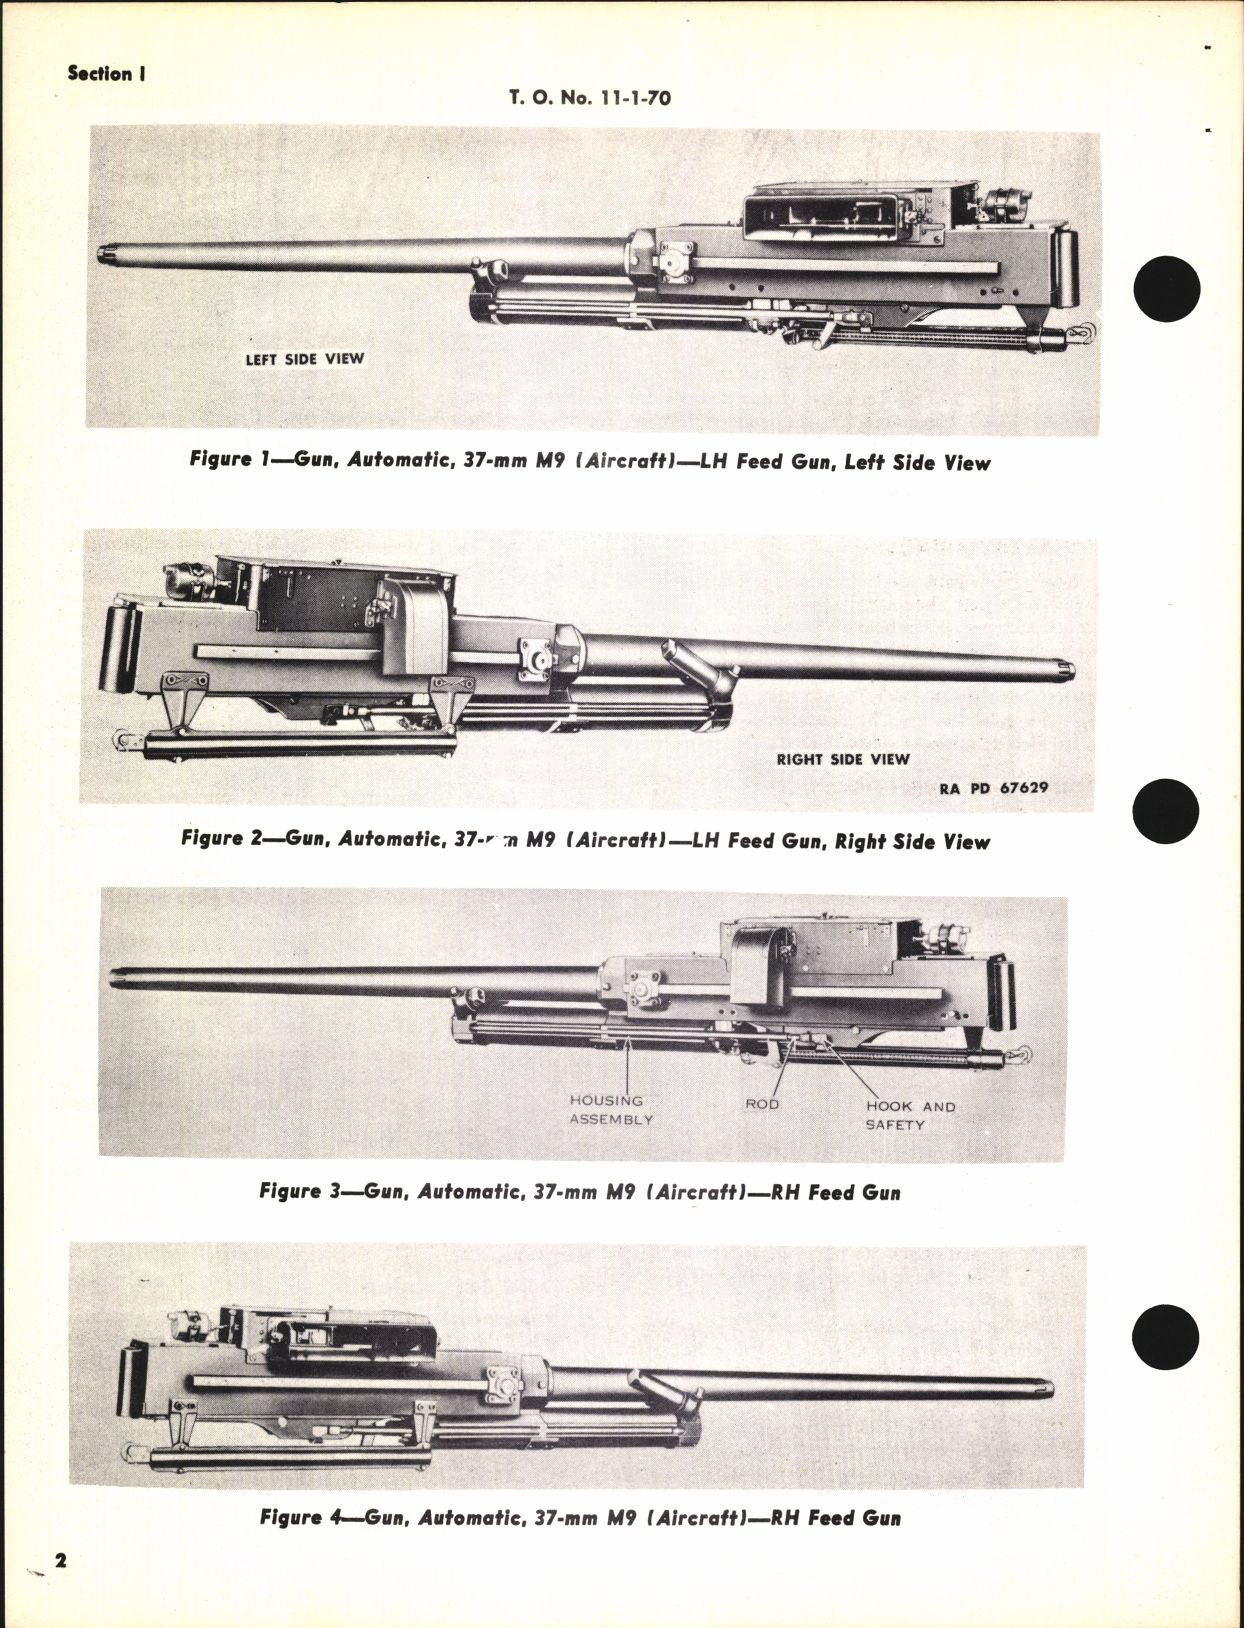 Sample page 6 from AirCorps Library document: Handbook of Instructions with Parts Catalog for 37 MM Automatic Aircraft Gun M9